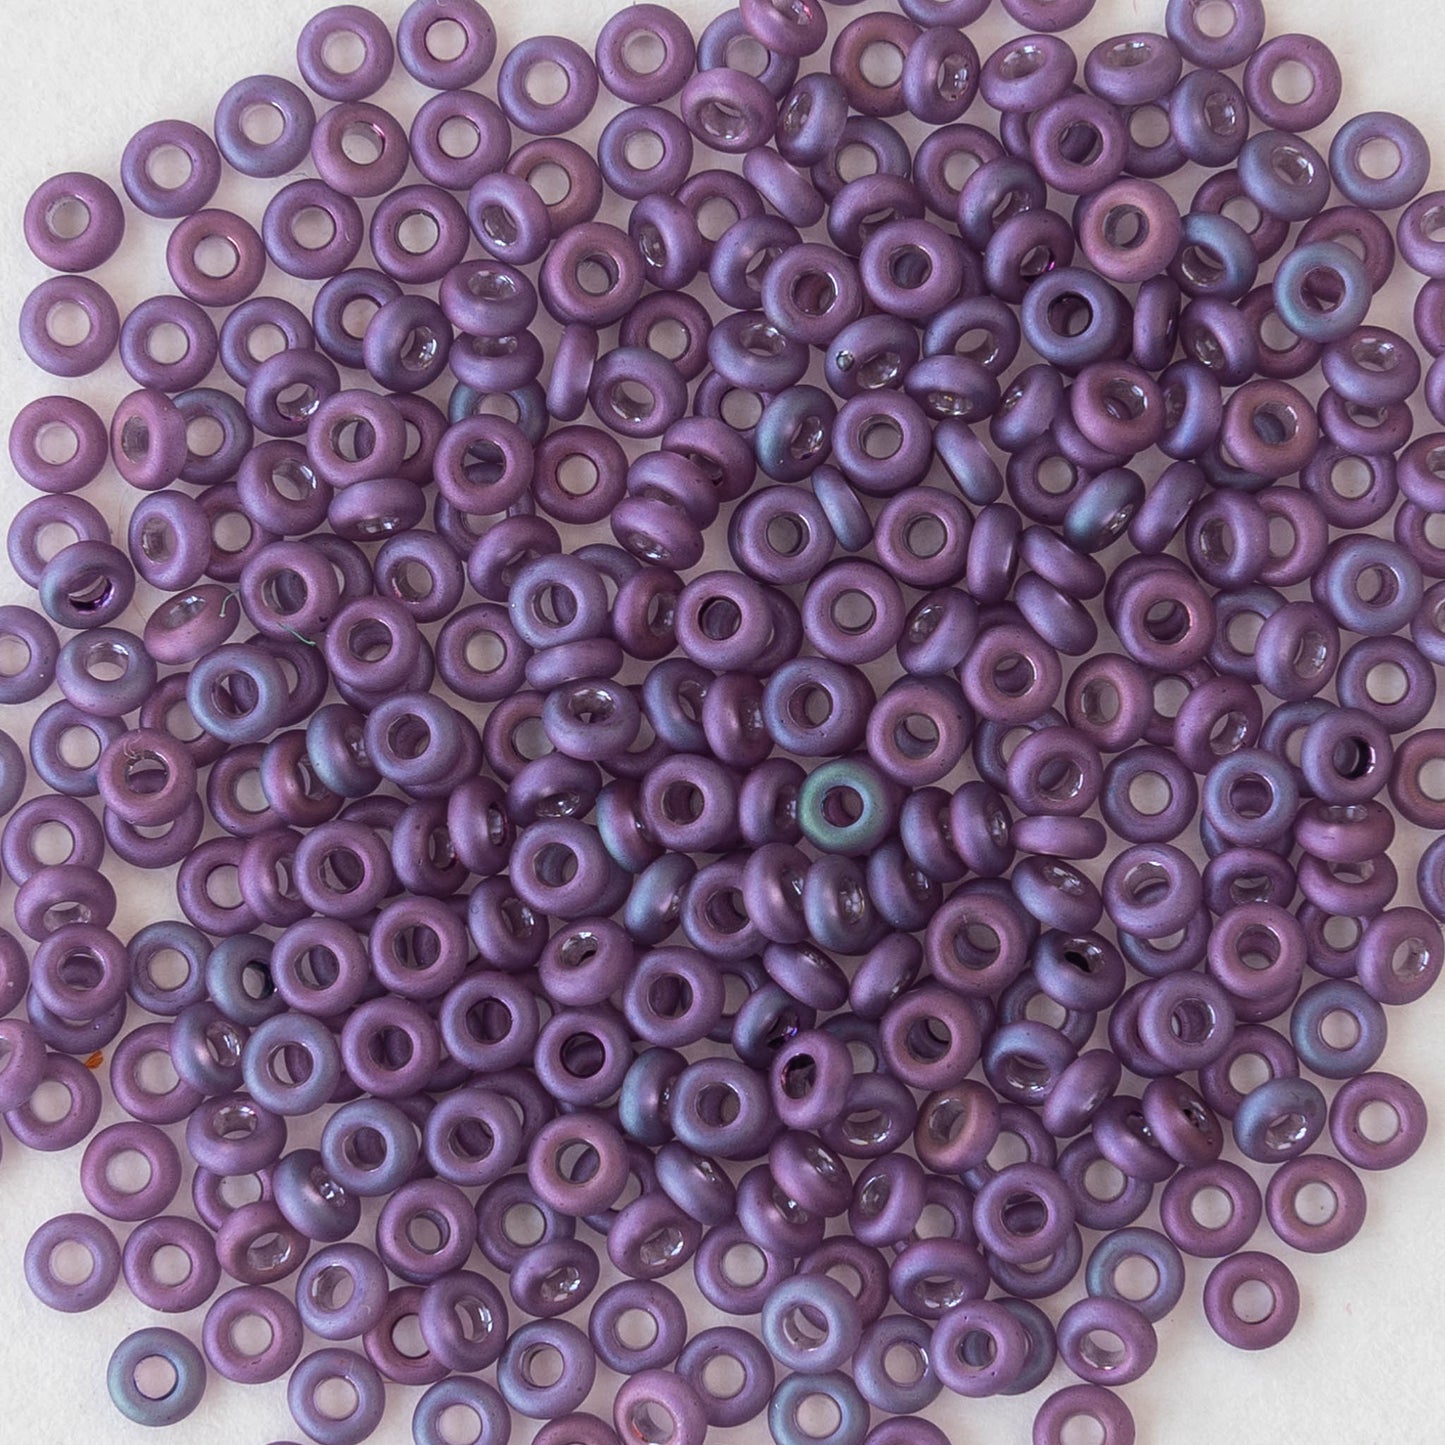 3mm O-Ring Beads - Gold-Lustered Matte Plum - 2.5 inch Tube